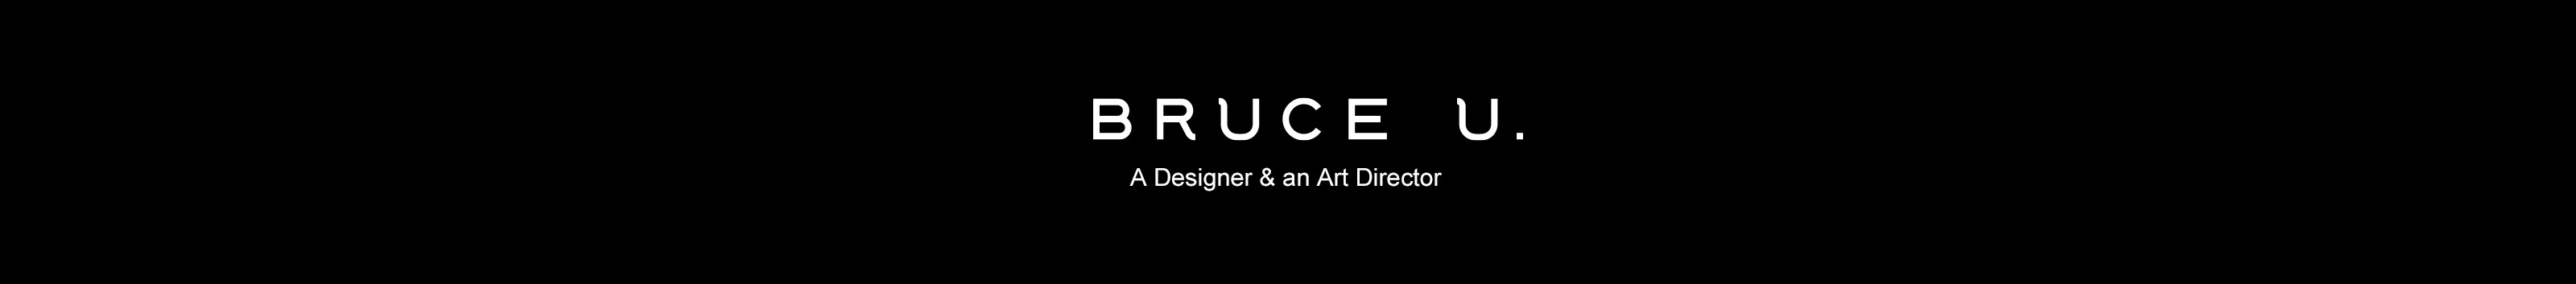 BRUCE YOU's profile banner